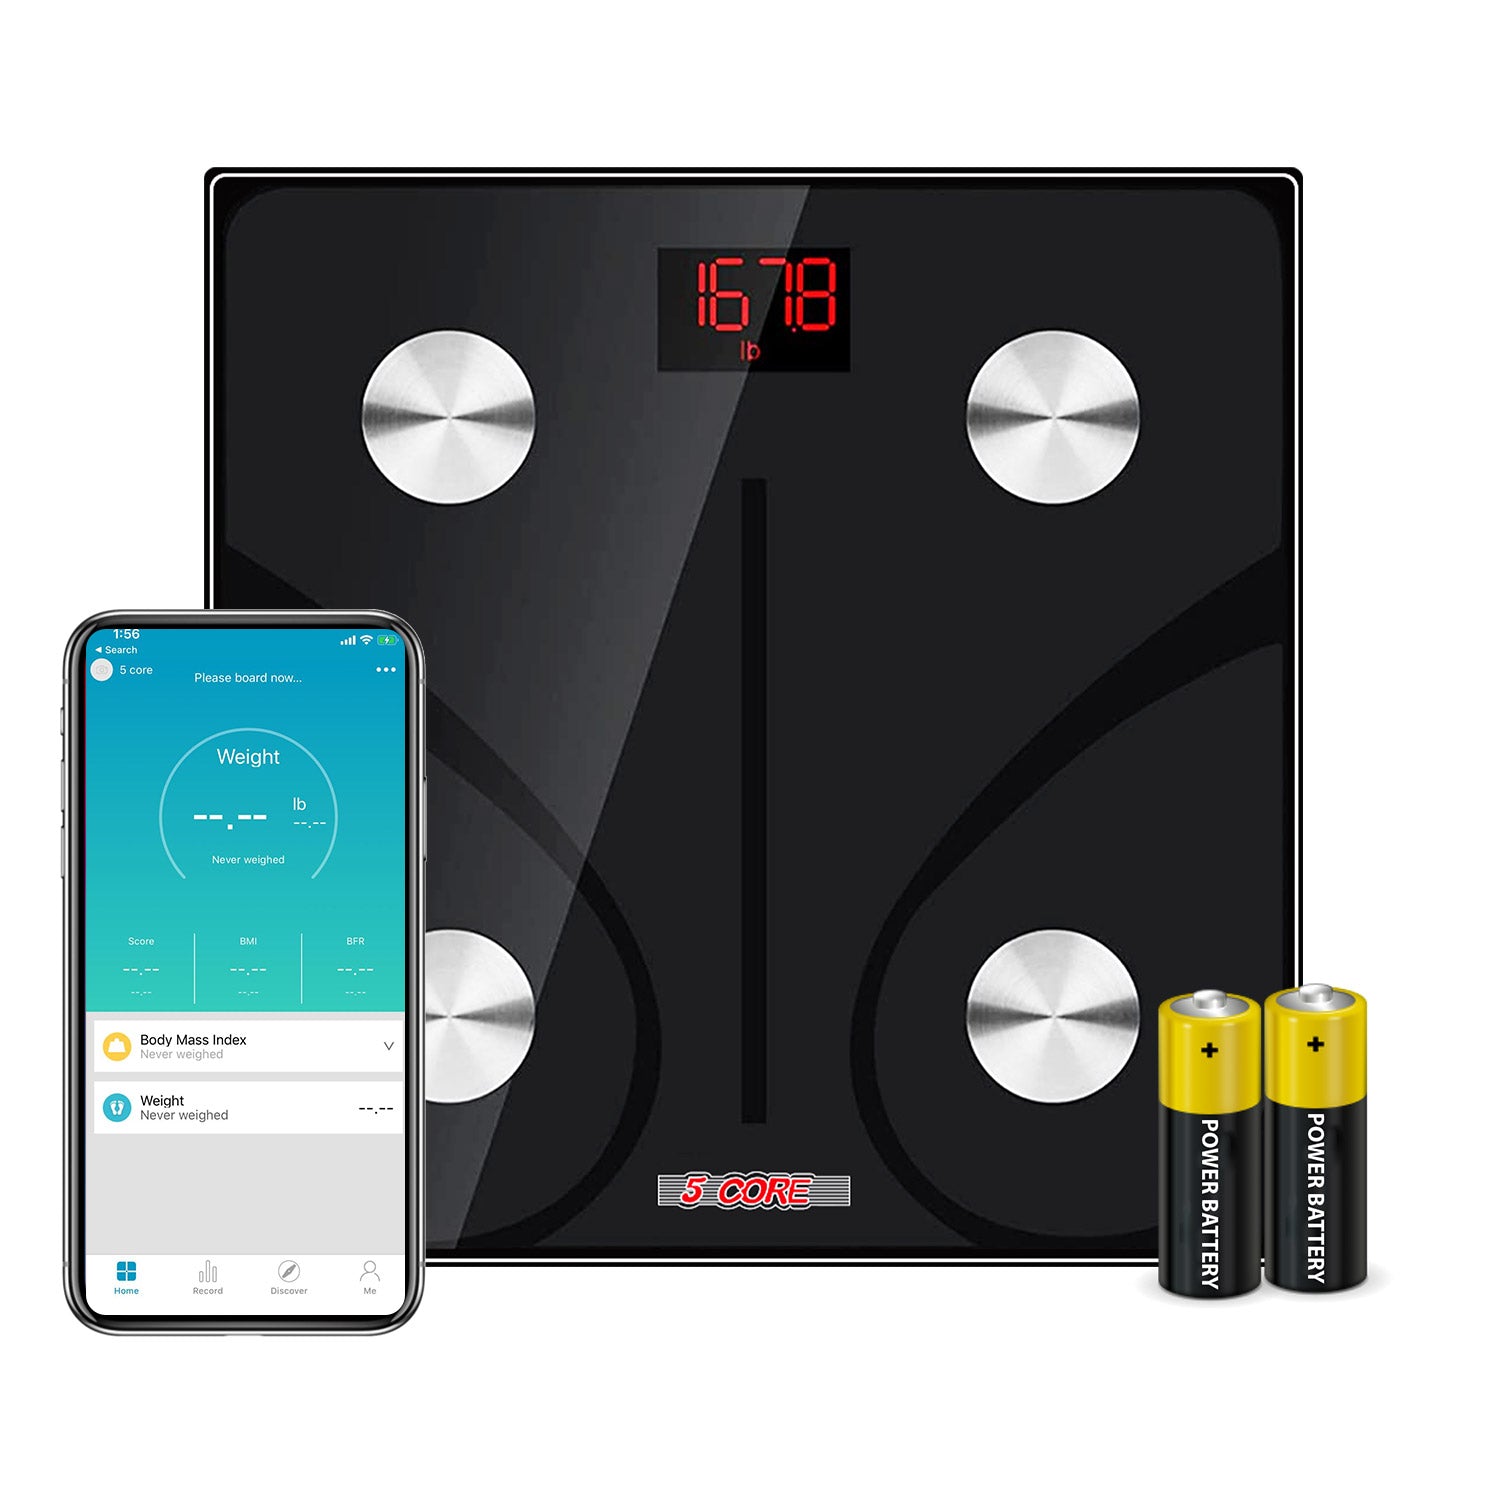 5 Core Bathroom Smart Scale: Accurate Weight Tracking